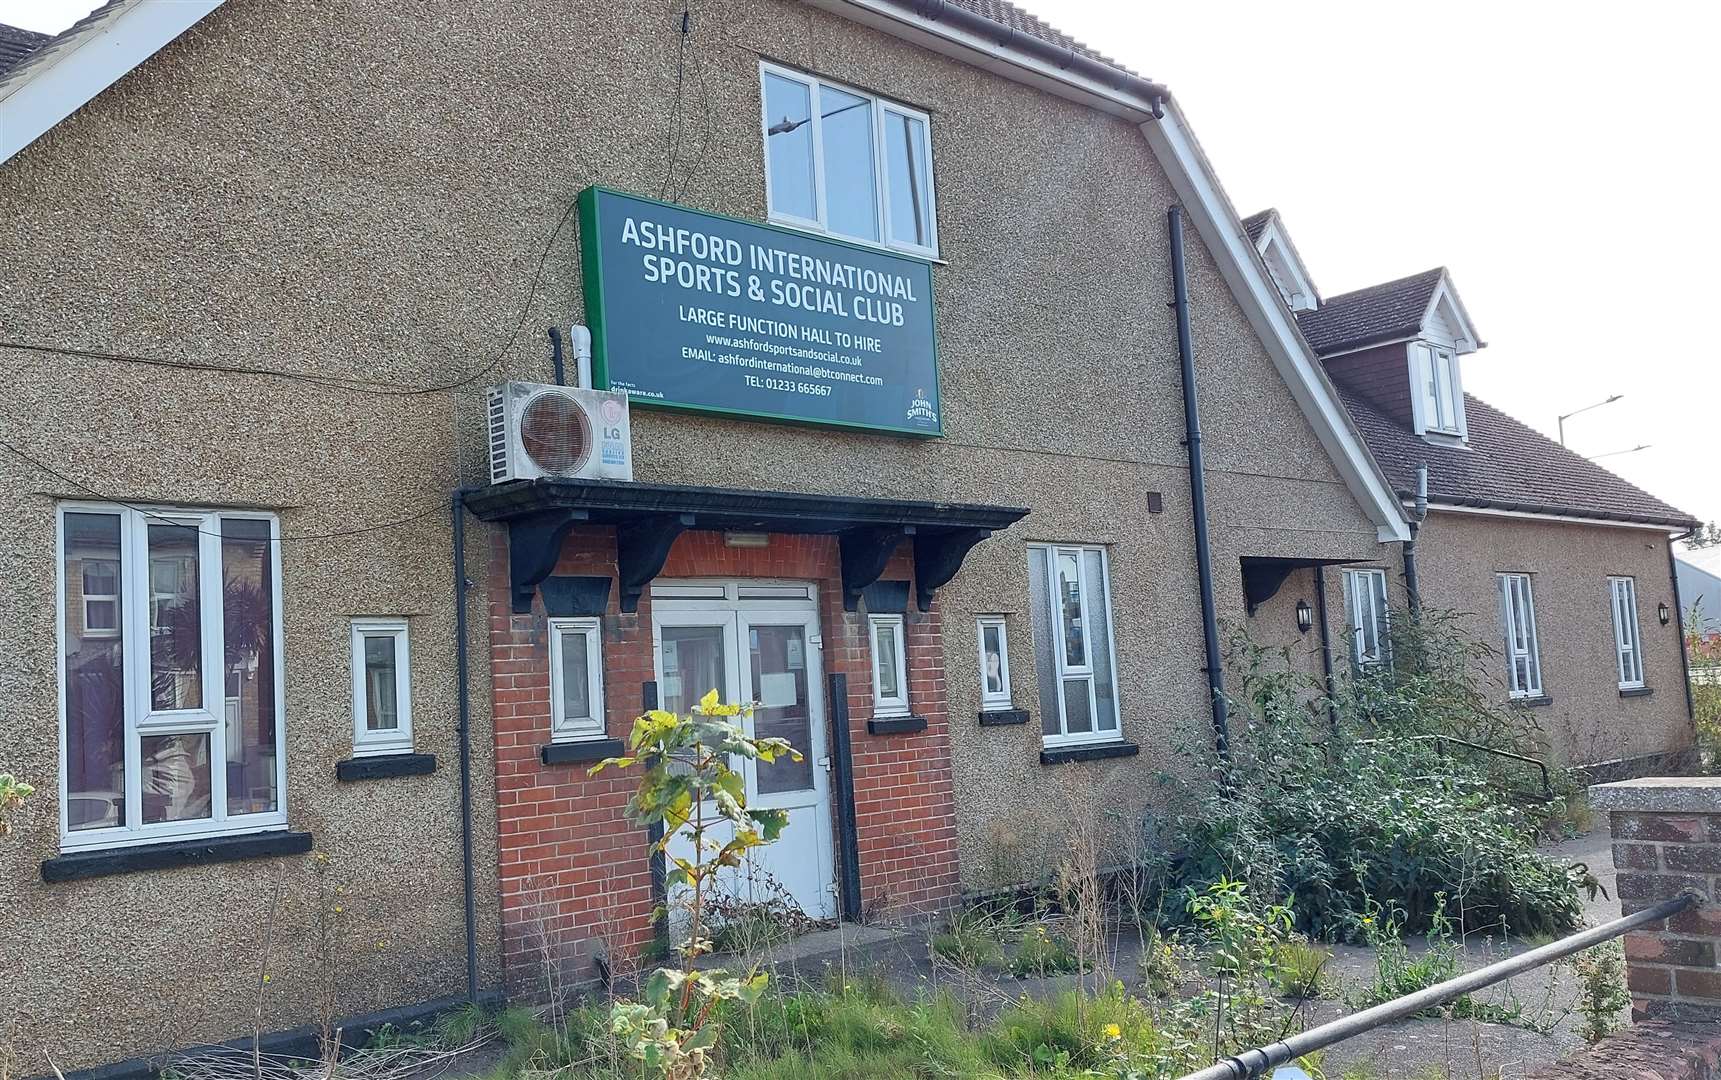 Ashford International Sports and Social Club in Beaver Road could be knocked down